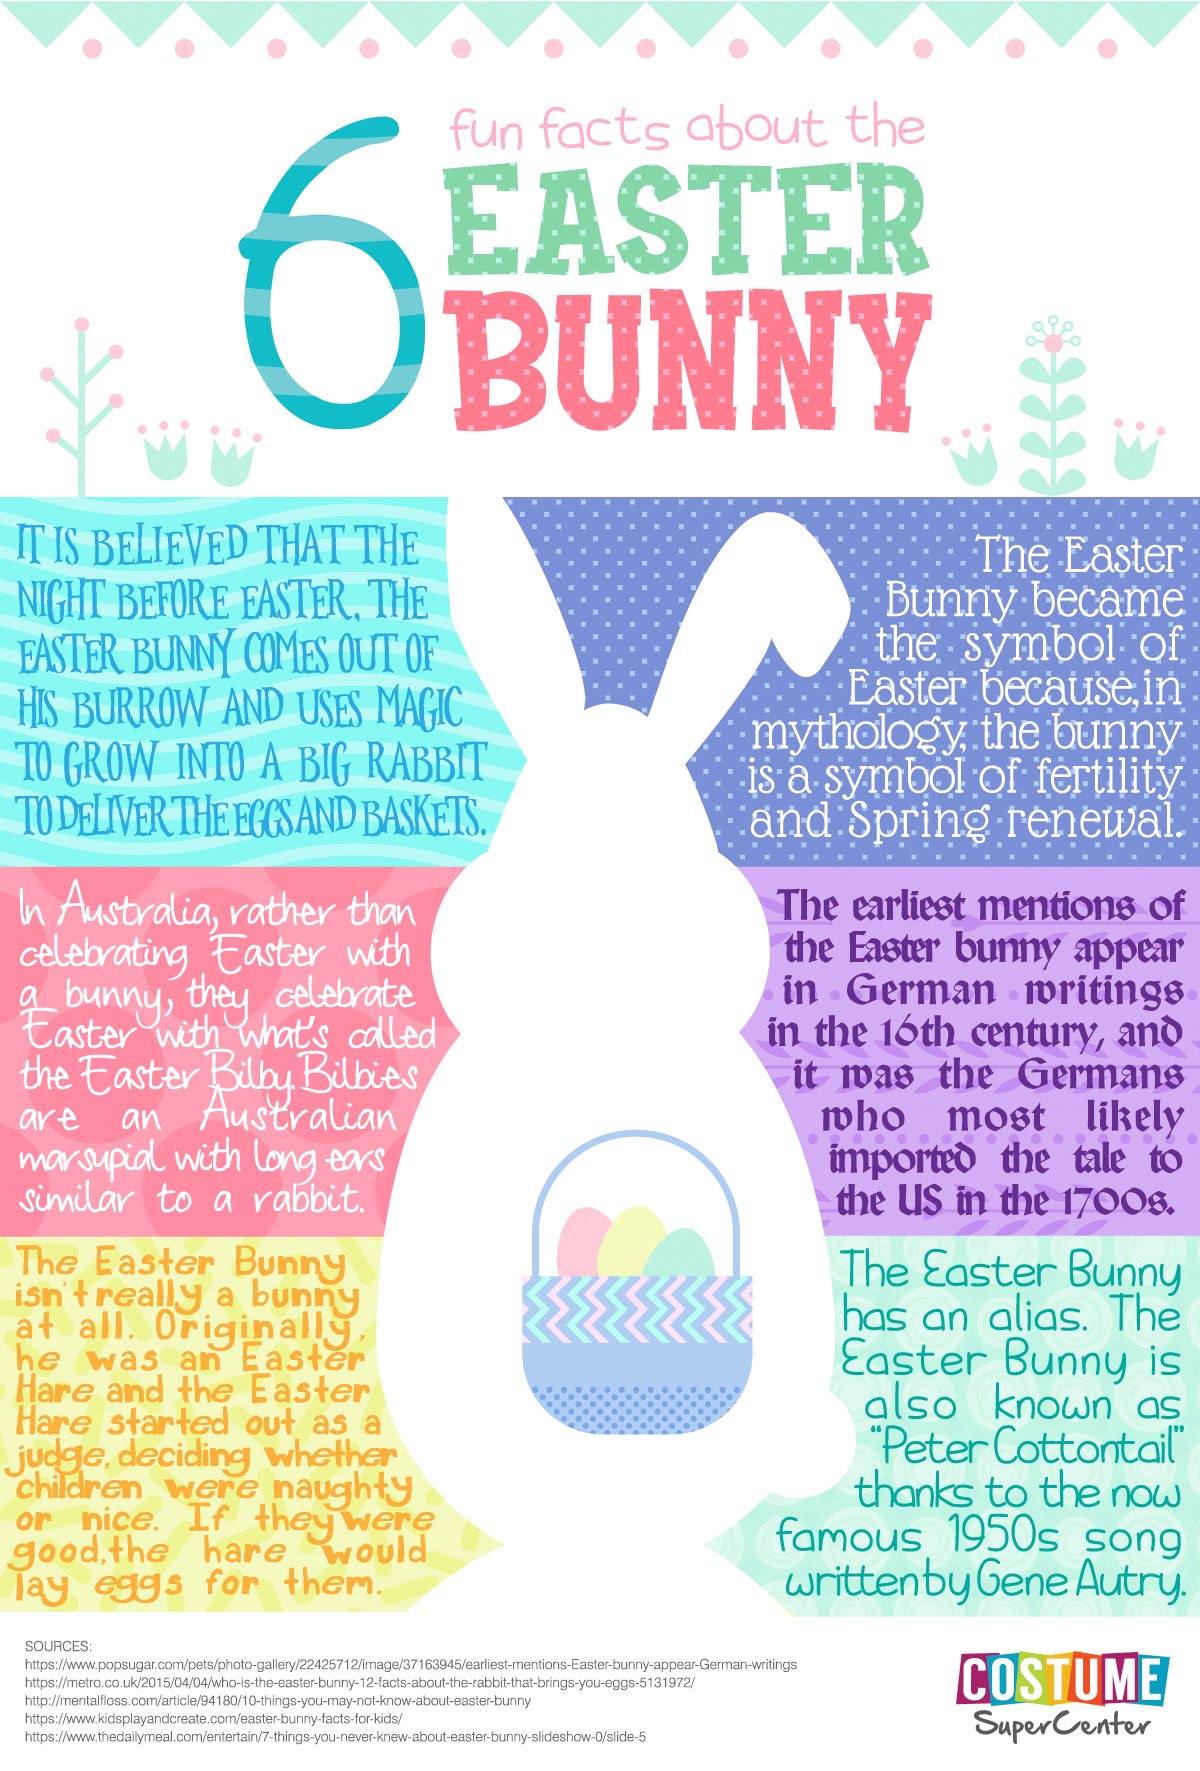 6 Fun Facts About The Easter Bunny #infographic